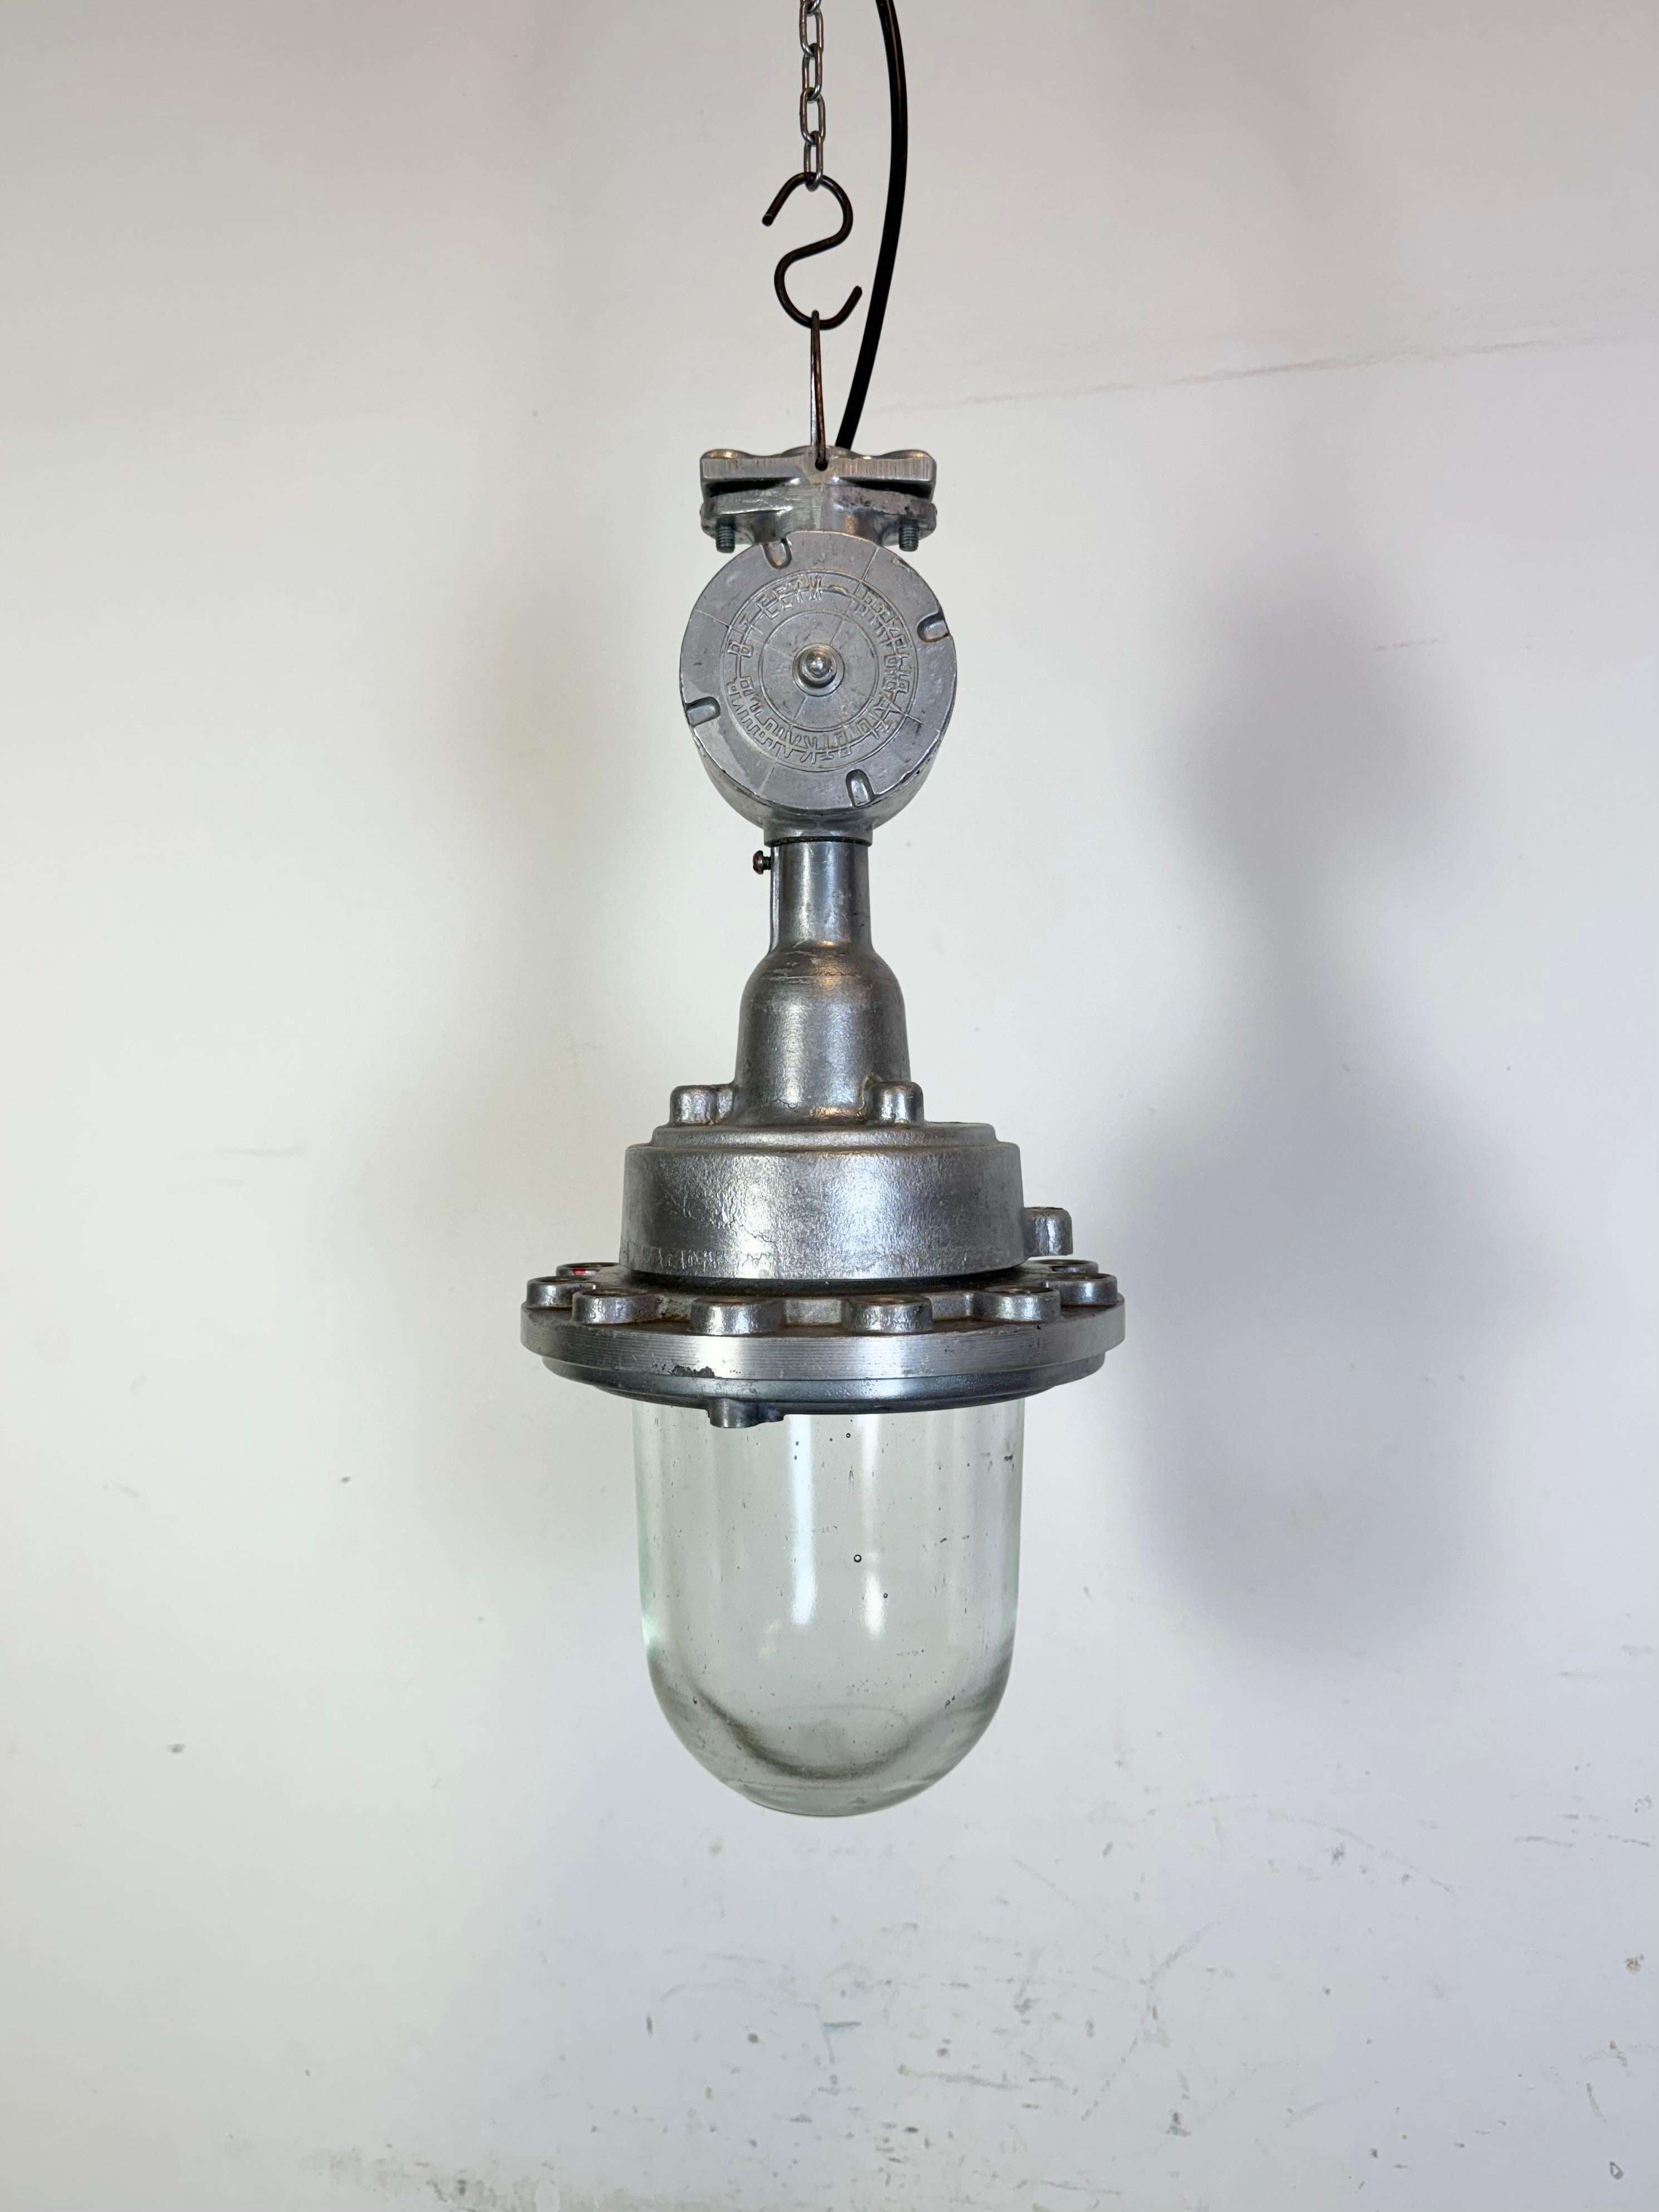 - Vintage Industrial factory light from the 1960s 
- Made in Ukraine in former Soviet Union
- Cast aluminium body
- Clear glass
- Socket requires standard E27/ E26 lightbulbs 
- New wire 
- Diameter of the lamp: 23 cm
- Height : 56 cm
- Weight : 7,4